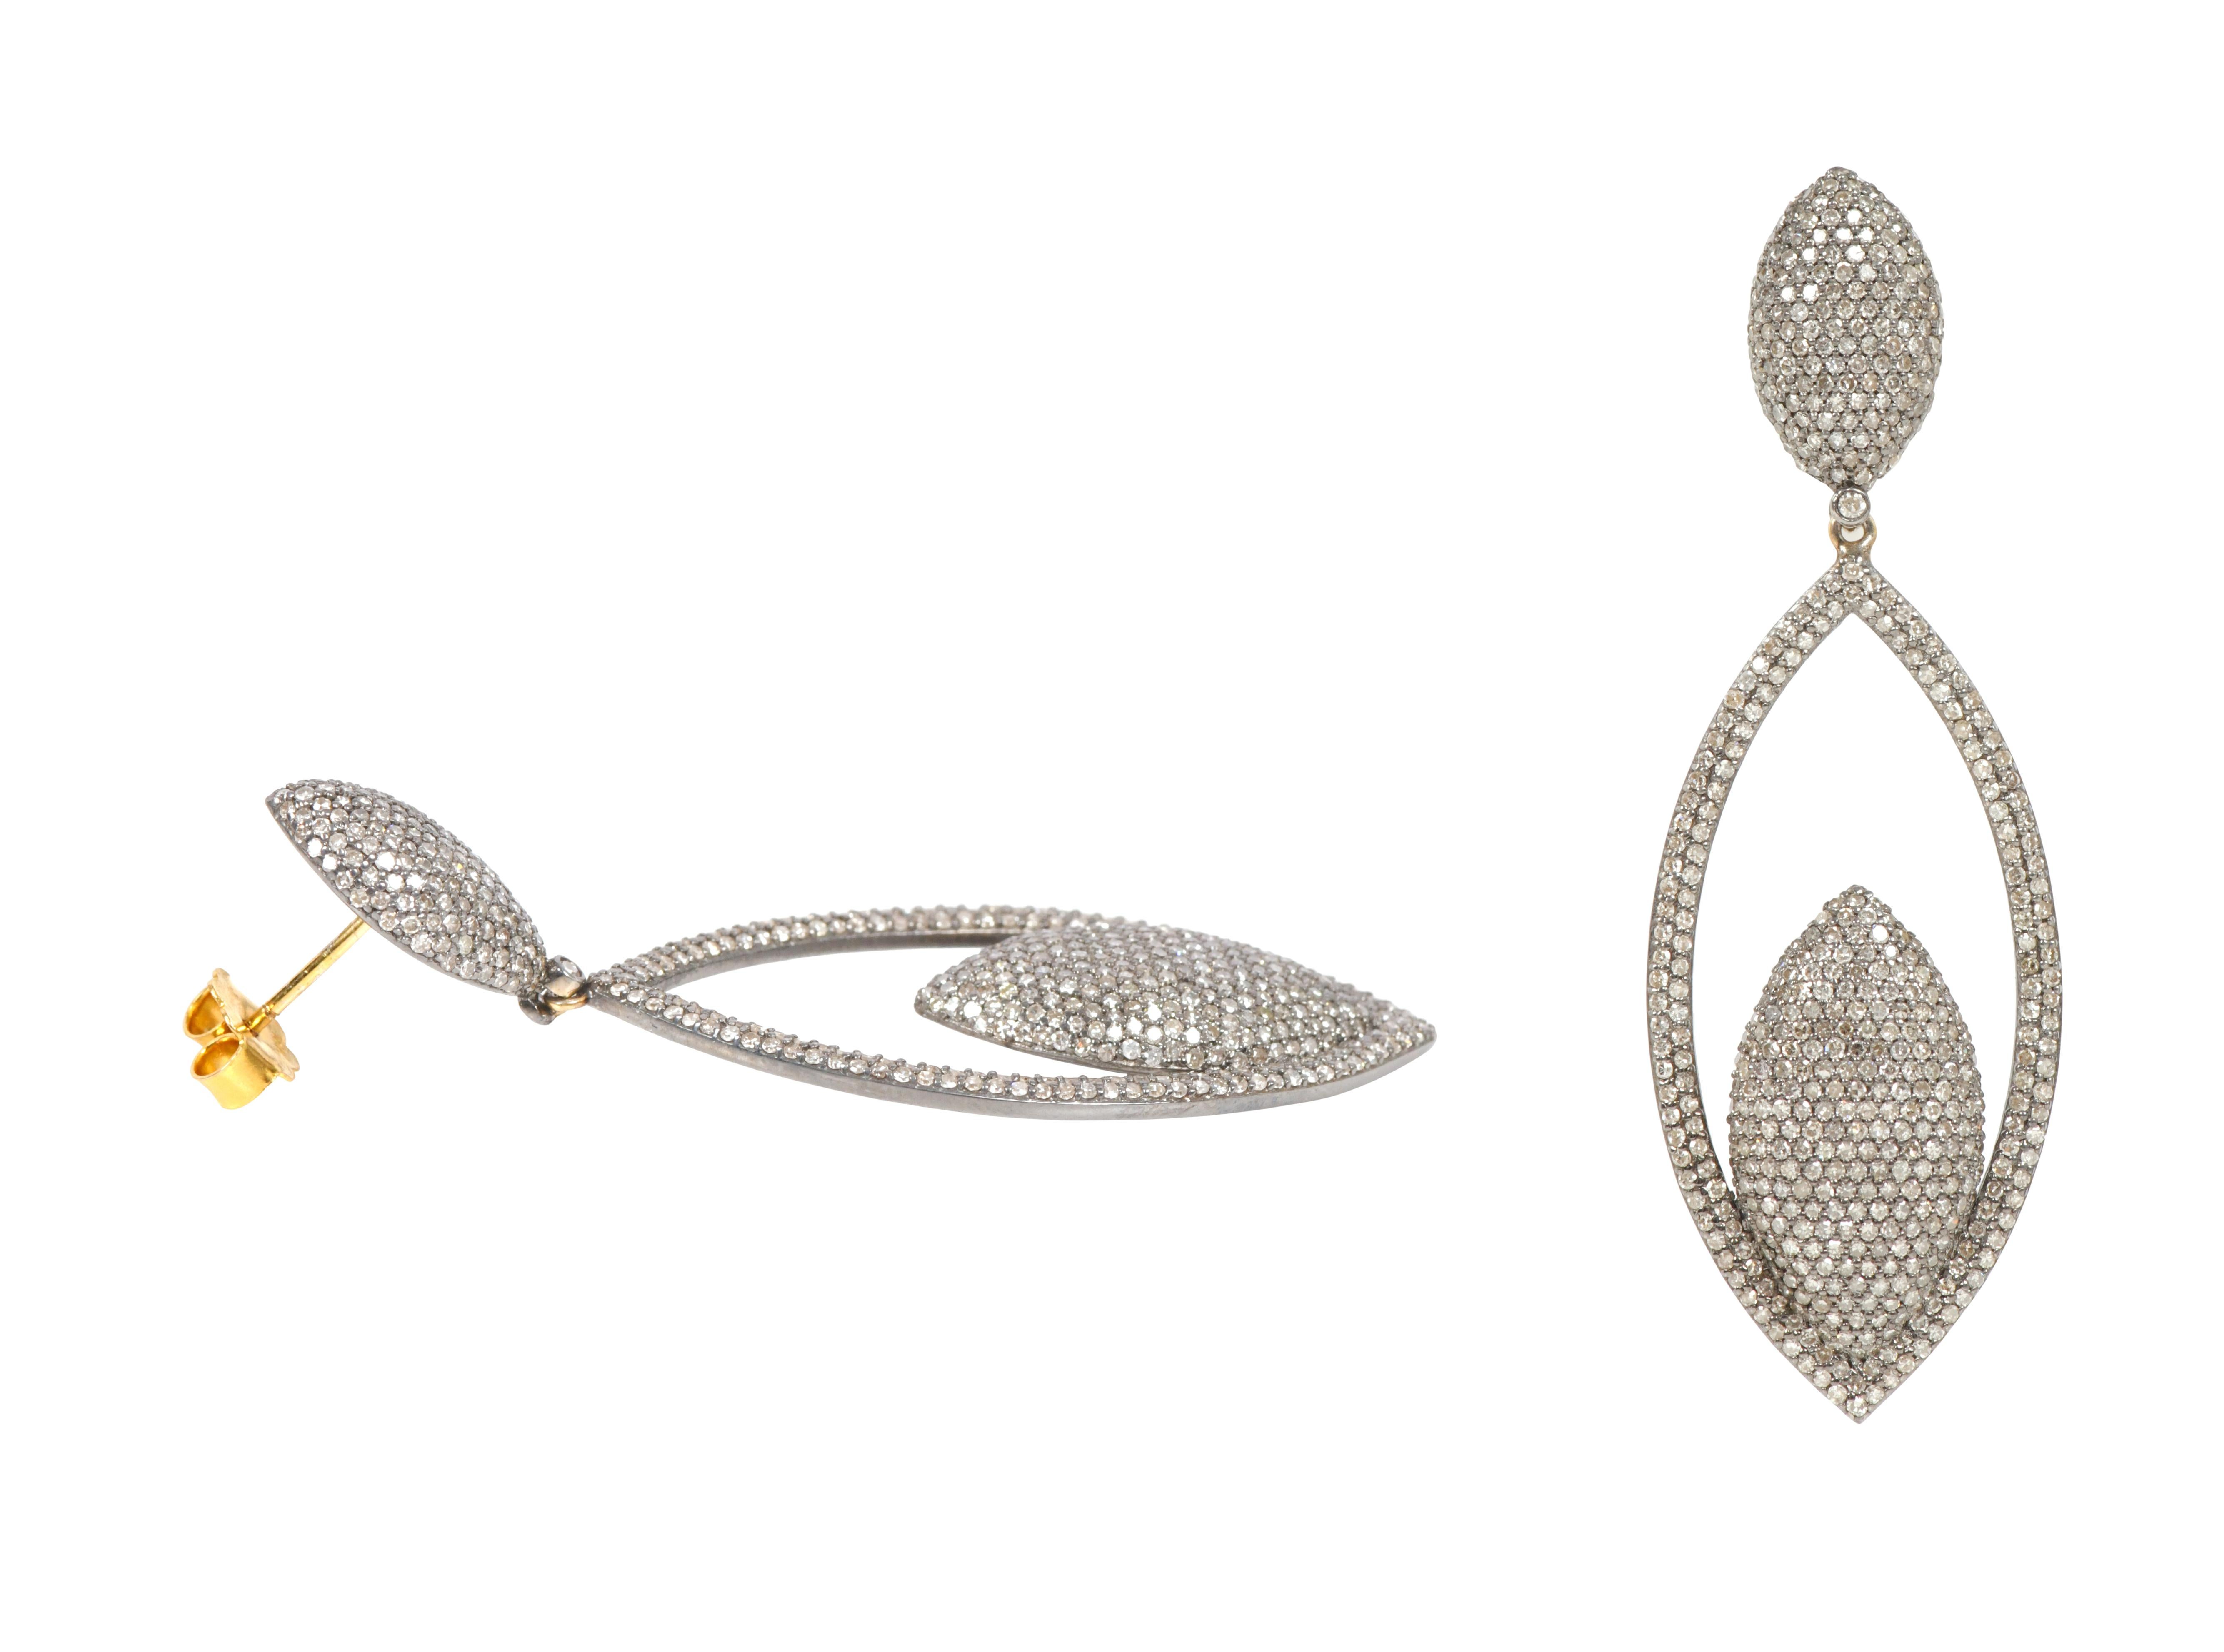 4.81 Carat Pave Diamond Cocktail Drop Earrings in Victorian Style

This Victorian art-deco style diamond pave set long earring is sensational. The open marquise shape is magnificently formed with two pave set diamond rows on the outside with various